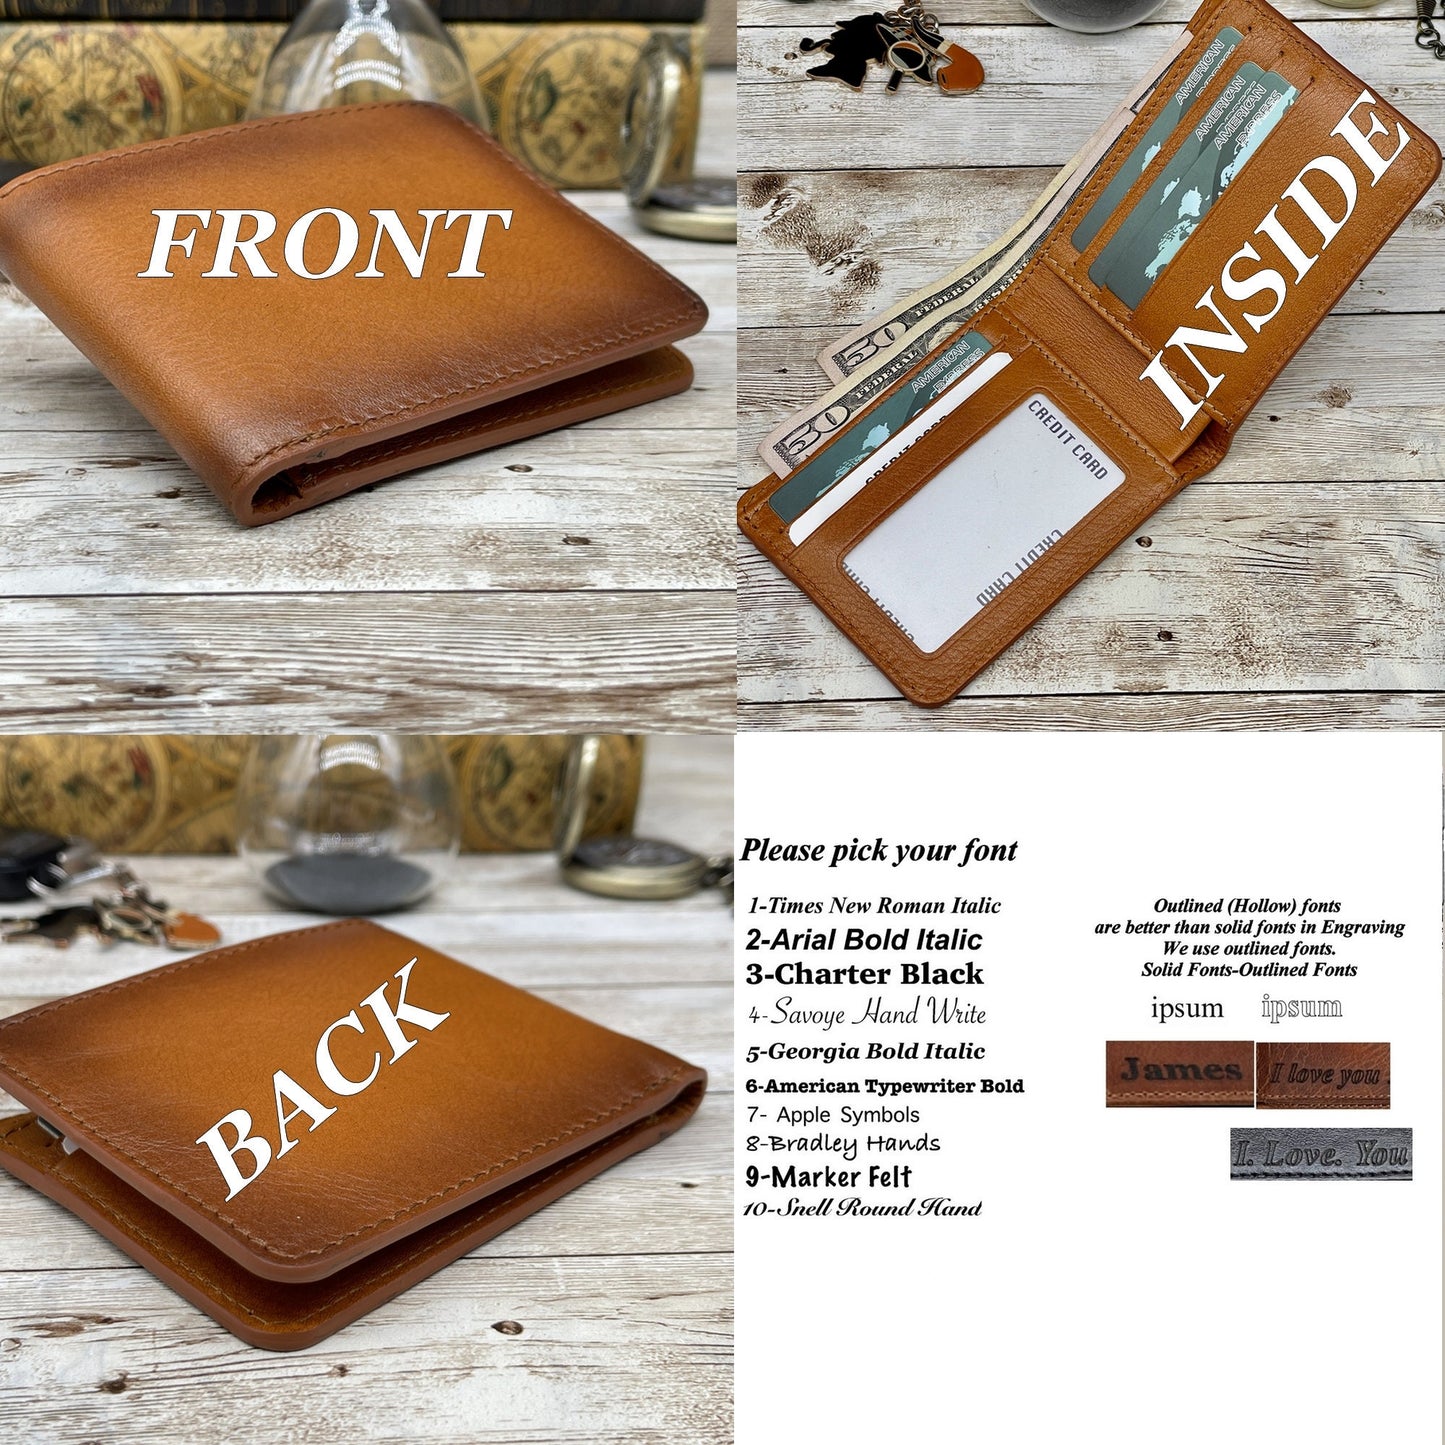 Leather Wallet Engrave All Message Text Initials Hand Writing Monograms Team College Car or Company Logos and Special Gift Package